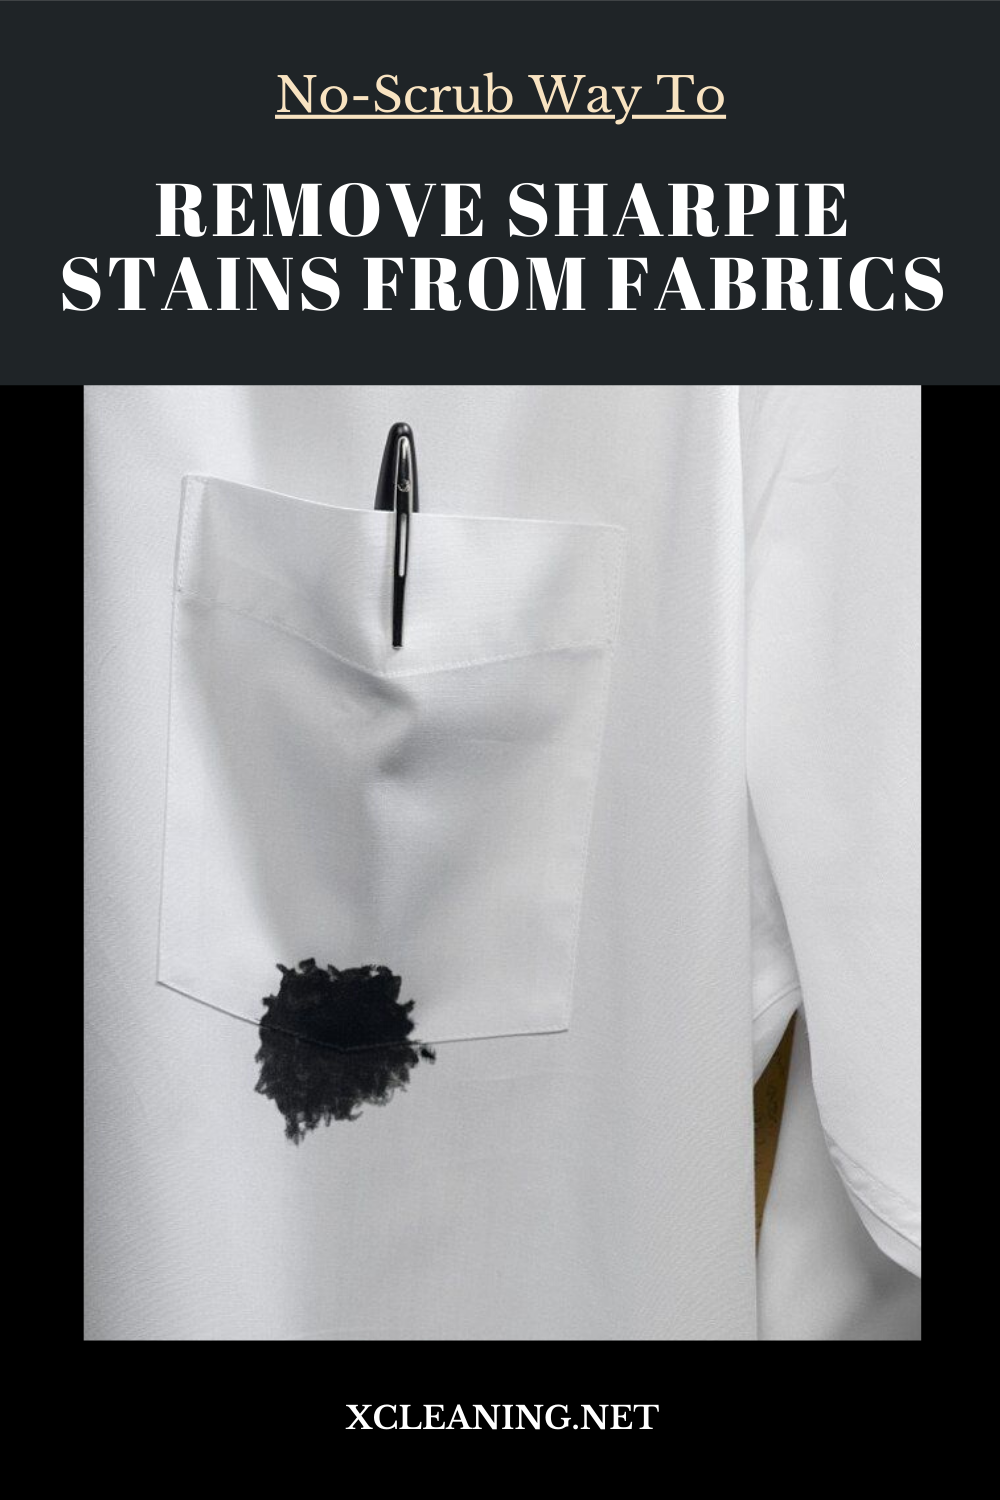 No-Scrub Way To Remove Sharpie Stains From Fabrics | xCleaning.net - Your Cleaning Tips - How To Get Sharpie Out Of Clothes Without Rubbing Alcohol